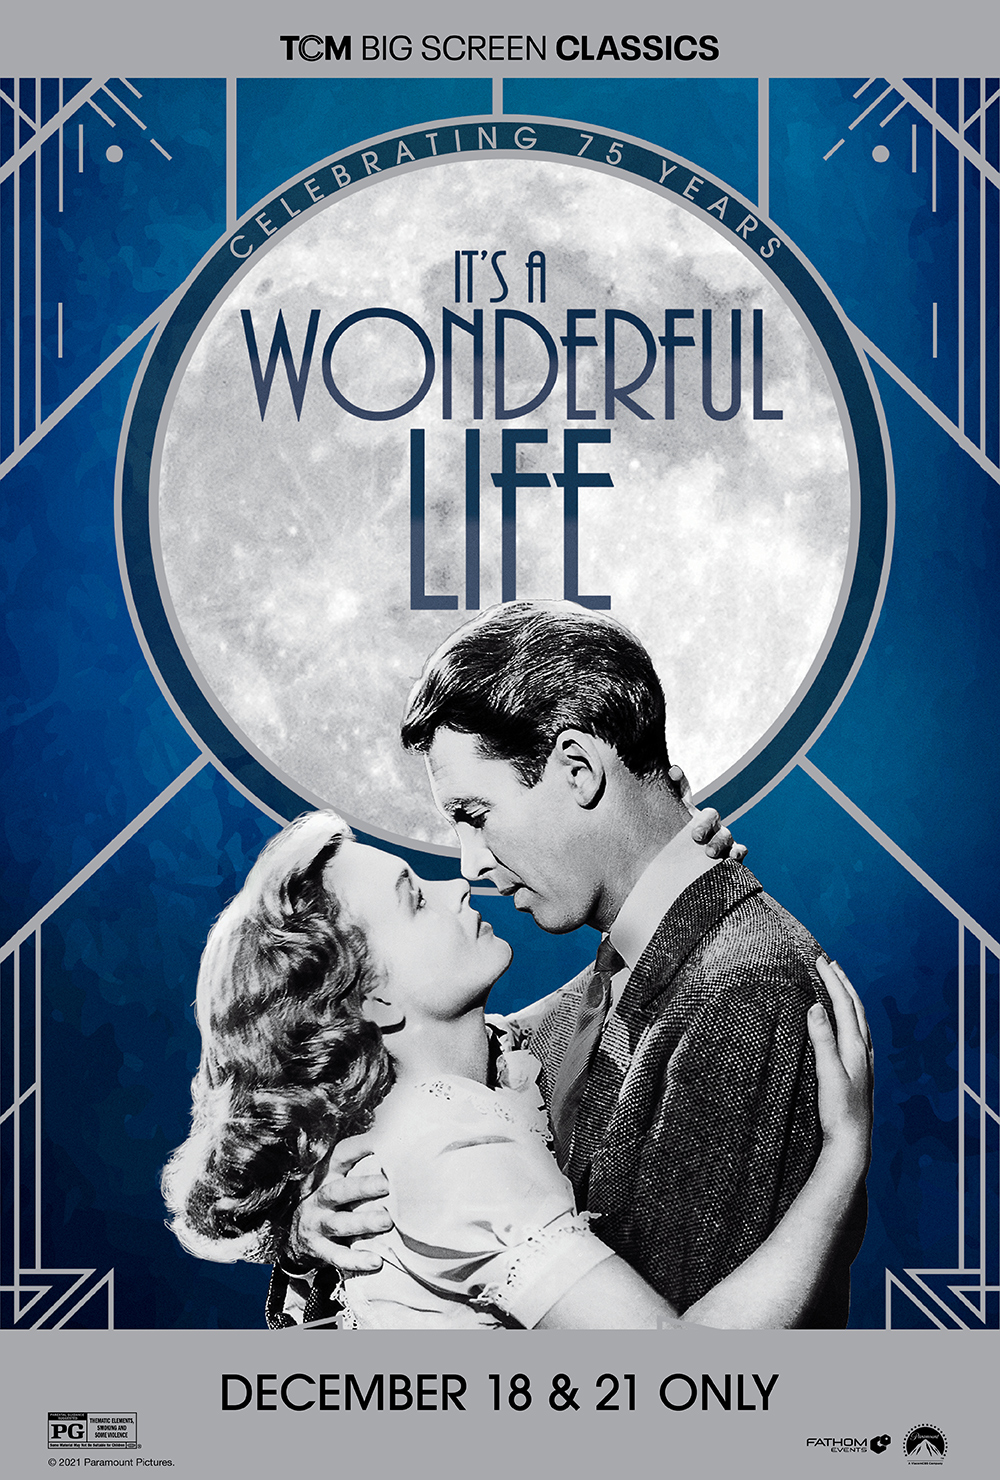 It's a Wonderful Life 75th Anniversary presented by TCM